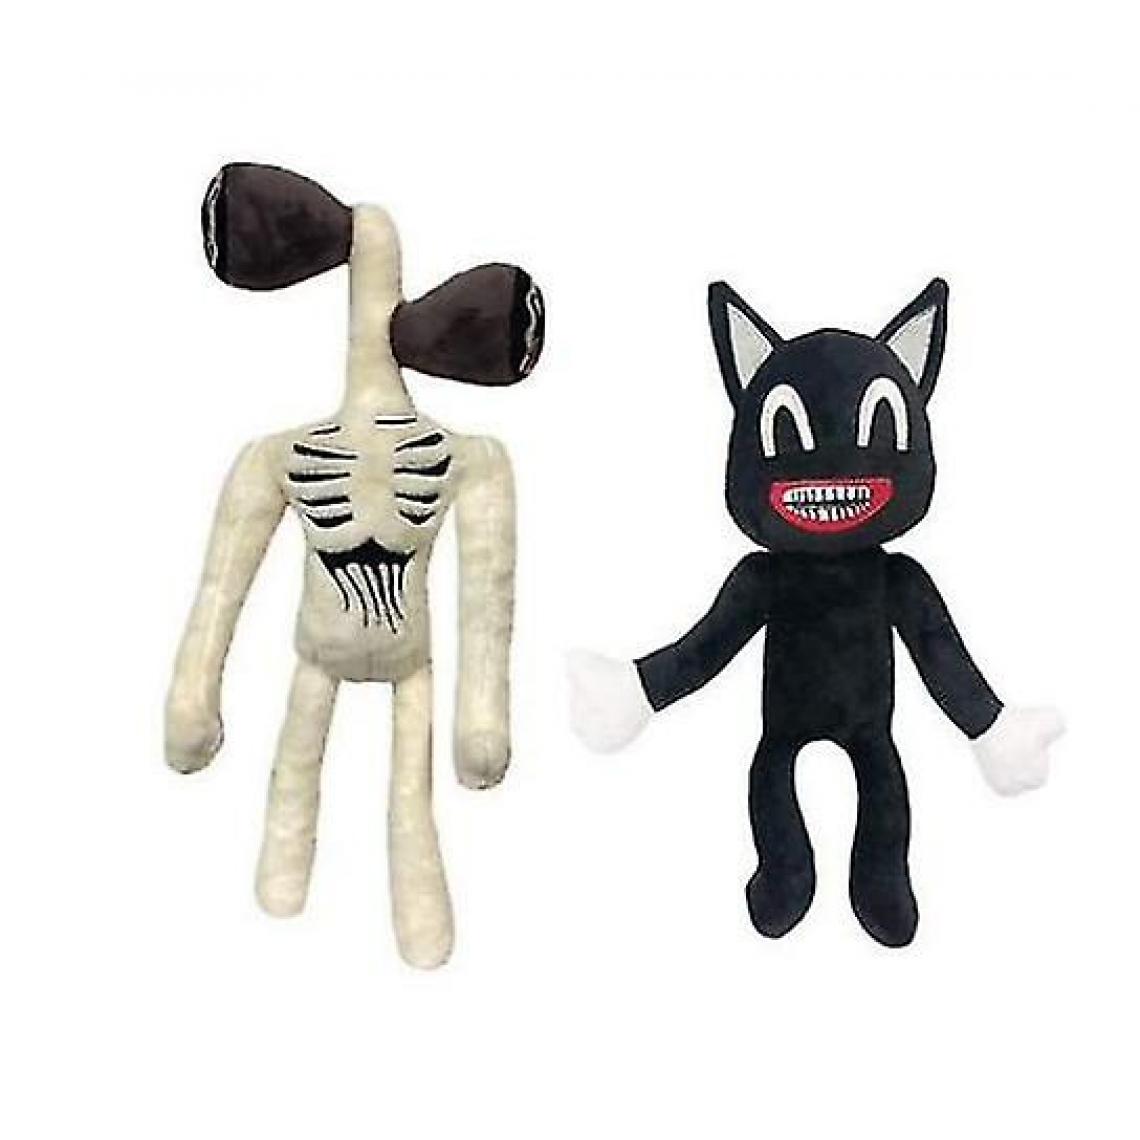 Universal - 2pcs/set Anime Sirenhead Plush Toy Siren Head Stuffed Doll Juguetes Legends Horror Black Cat Peluches Toys For Children Gifts() - Animaux